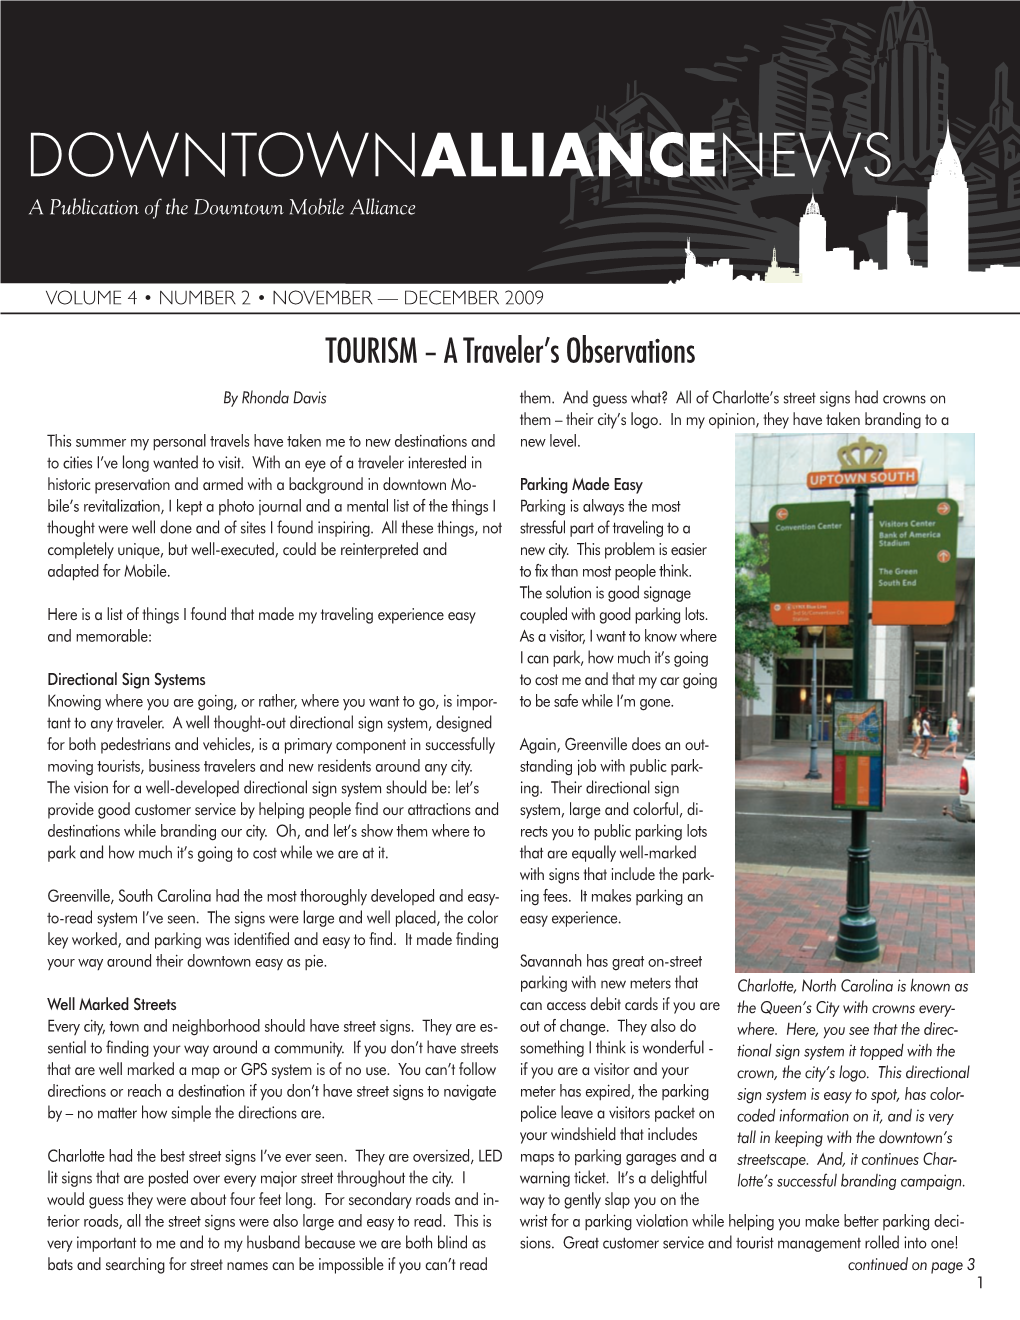 View Each Edition of the Downtown Alliance News Will Feature a Different Down- Town Property